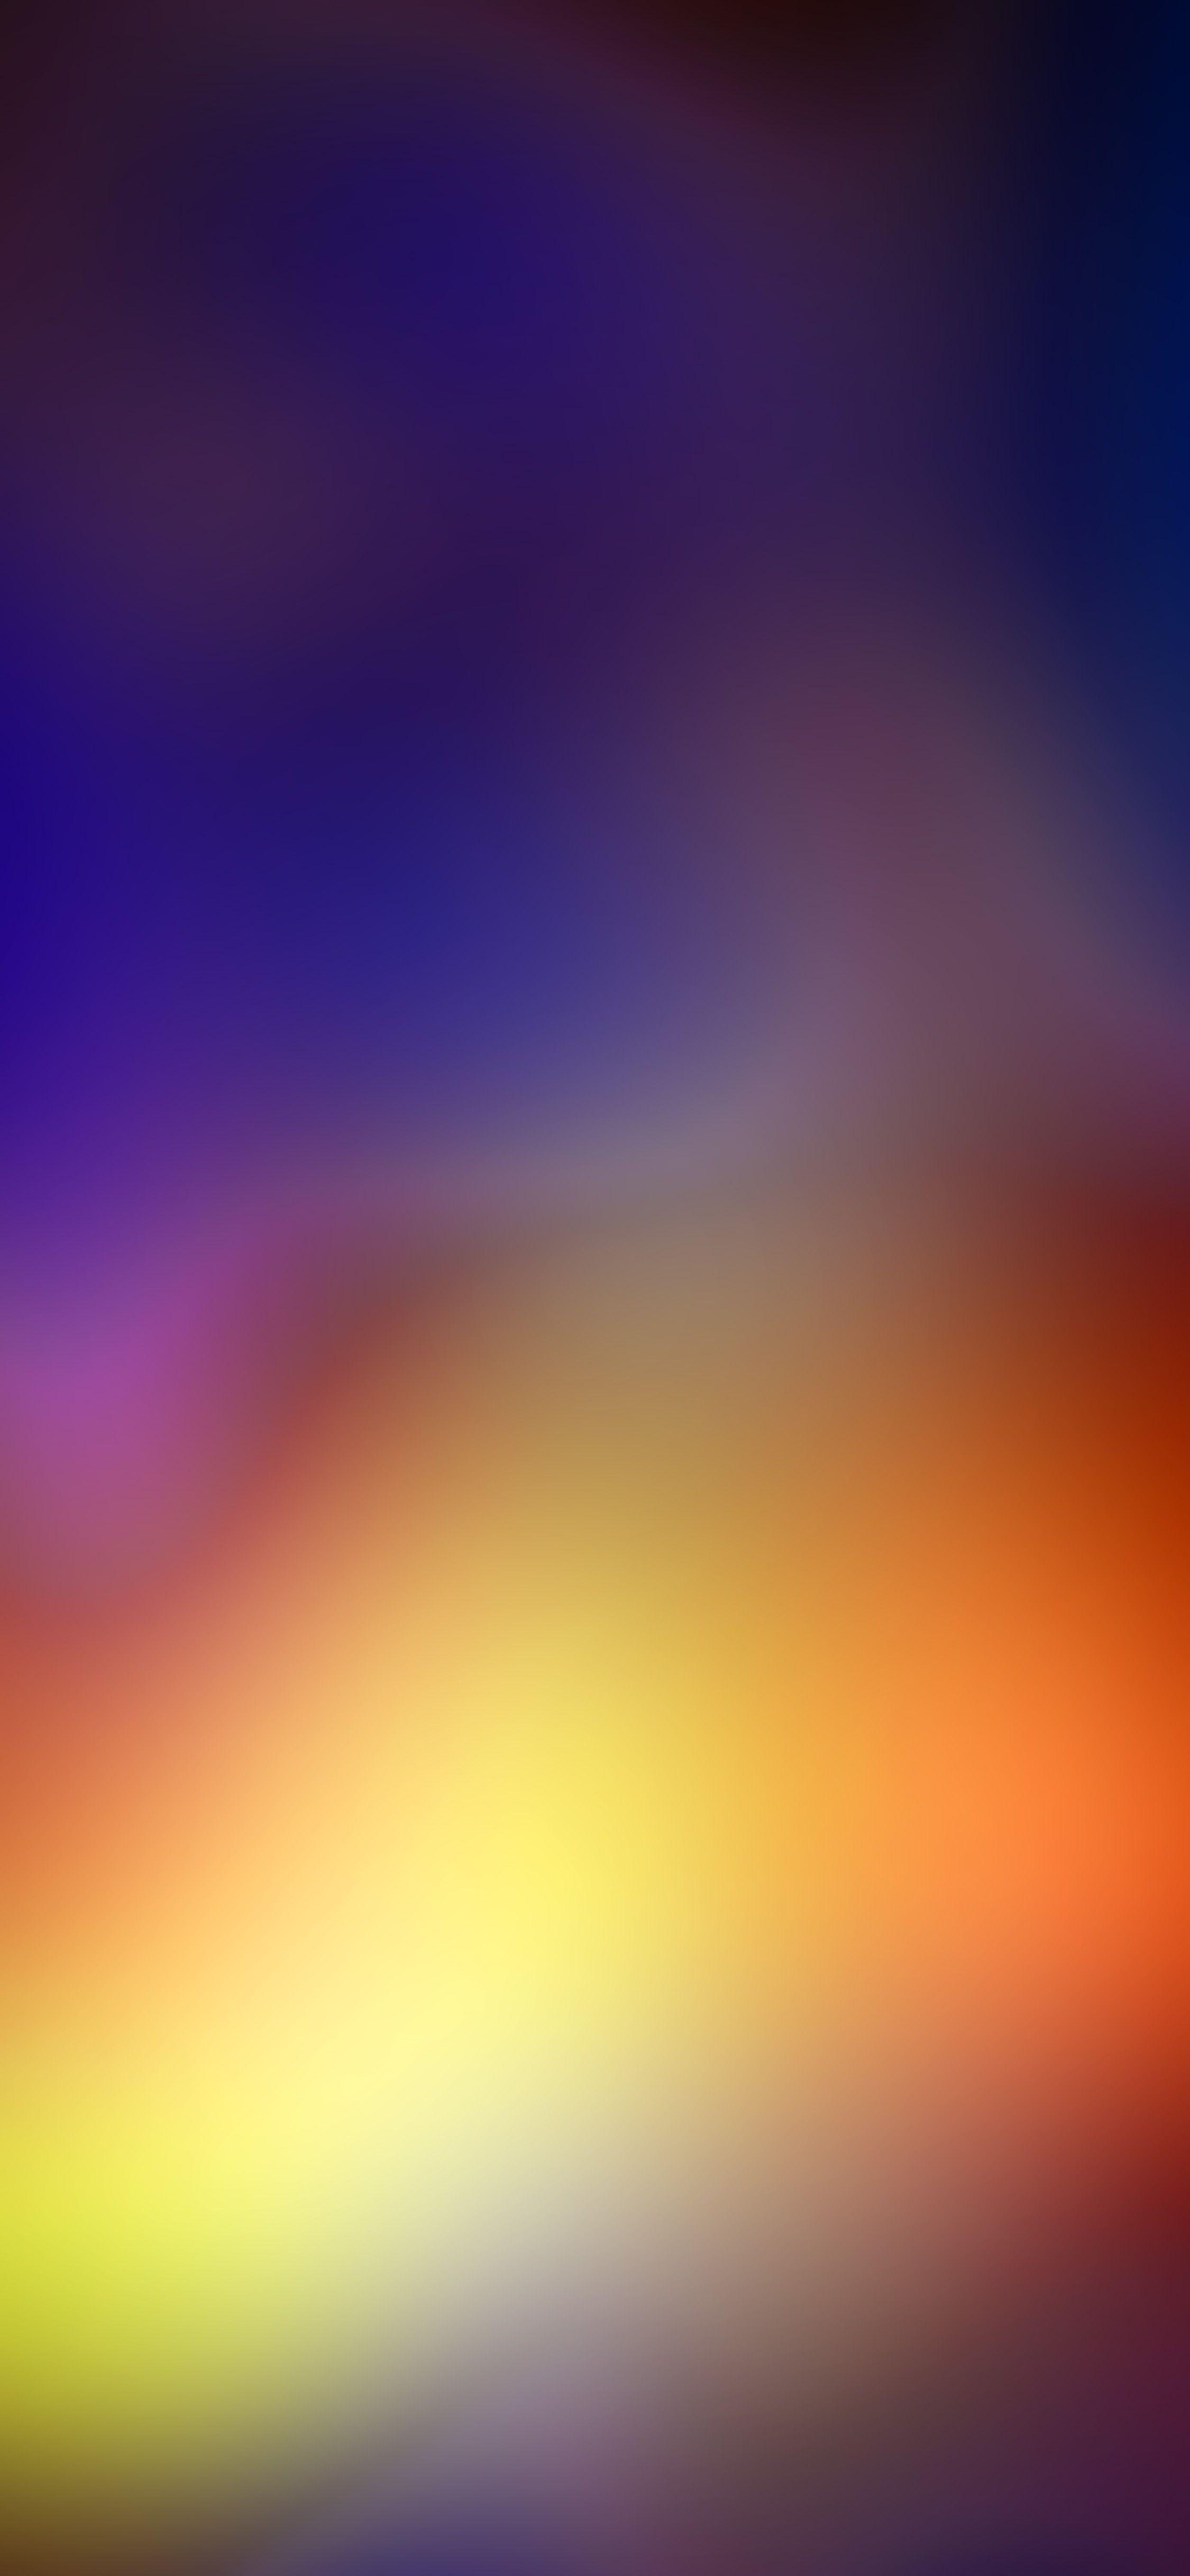 iPhone X Wallpaper (Stock and Original) HD Background